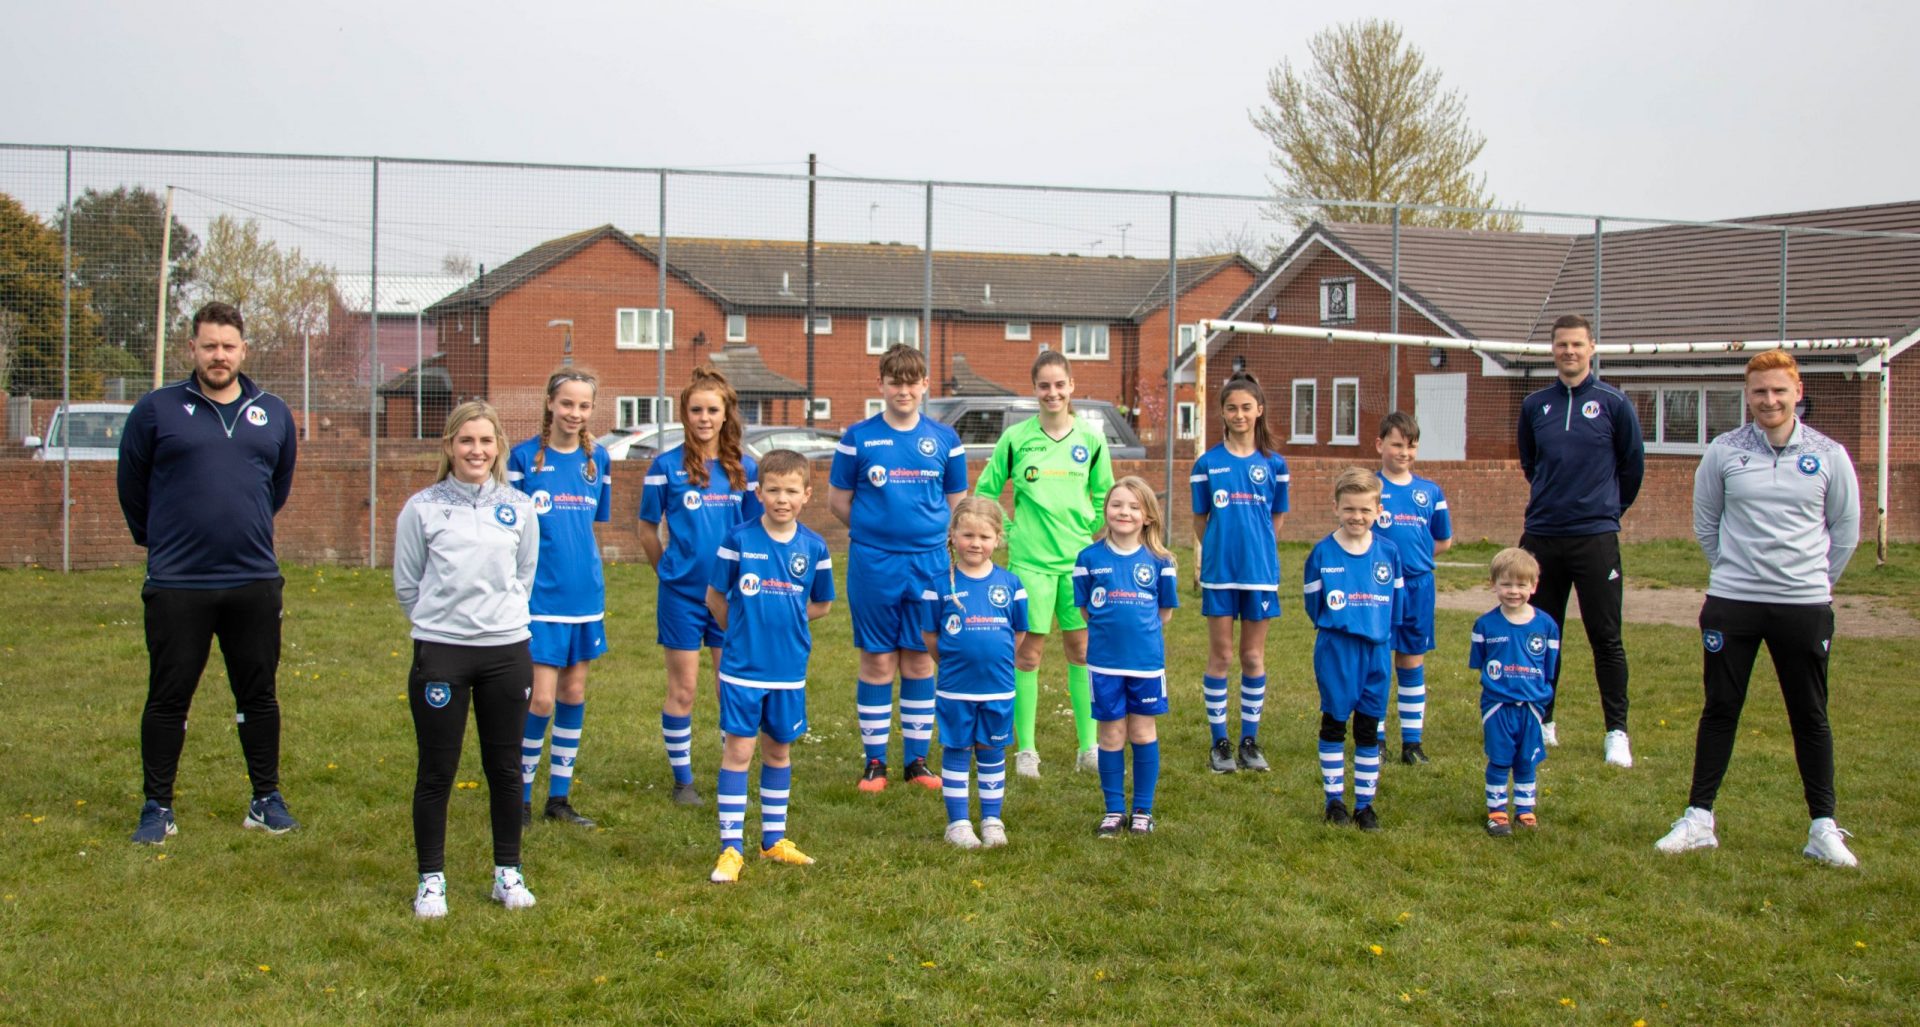 Achieve More Training Ltd Sponsorship of NFA grassroots and development teams